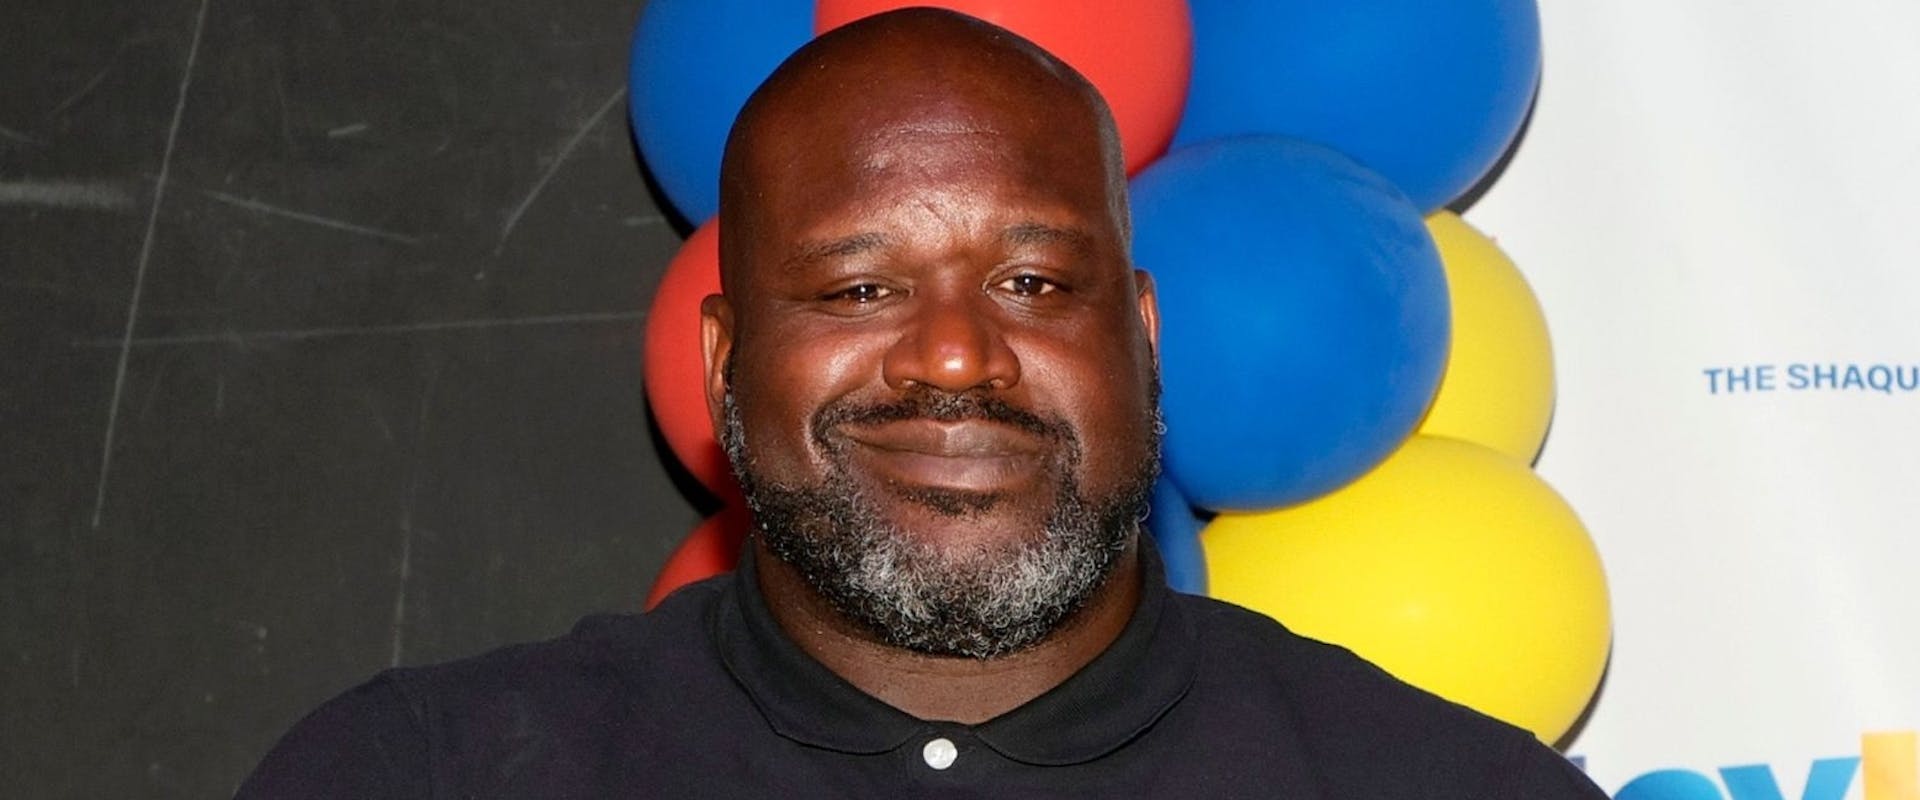 Former NBA player Shaquille O'Neal poses as he attends the unveiling of the Shaq Courts at the Doolittle Complex donated by Icy Hot and the Shaquille O'Neal Foundation in partnership with the city of Las Vegas on October 23, 2021 in Las Vegas, Nevada.